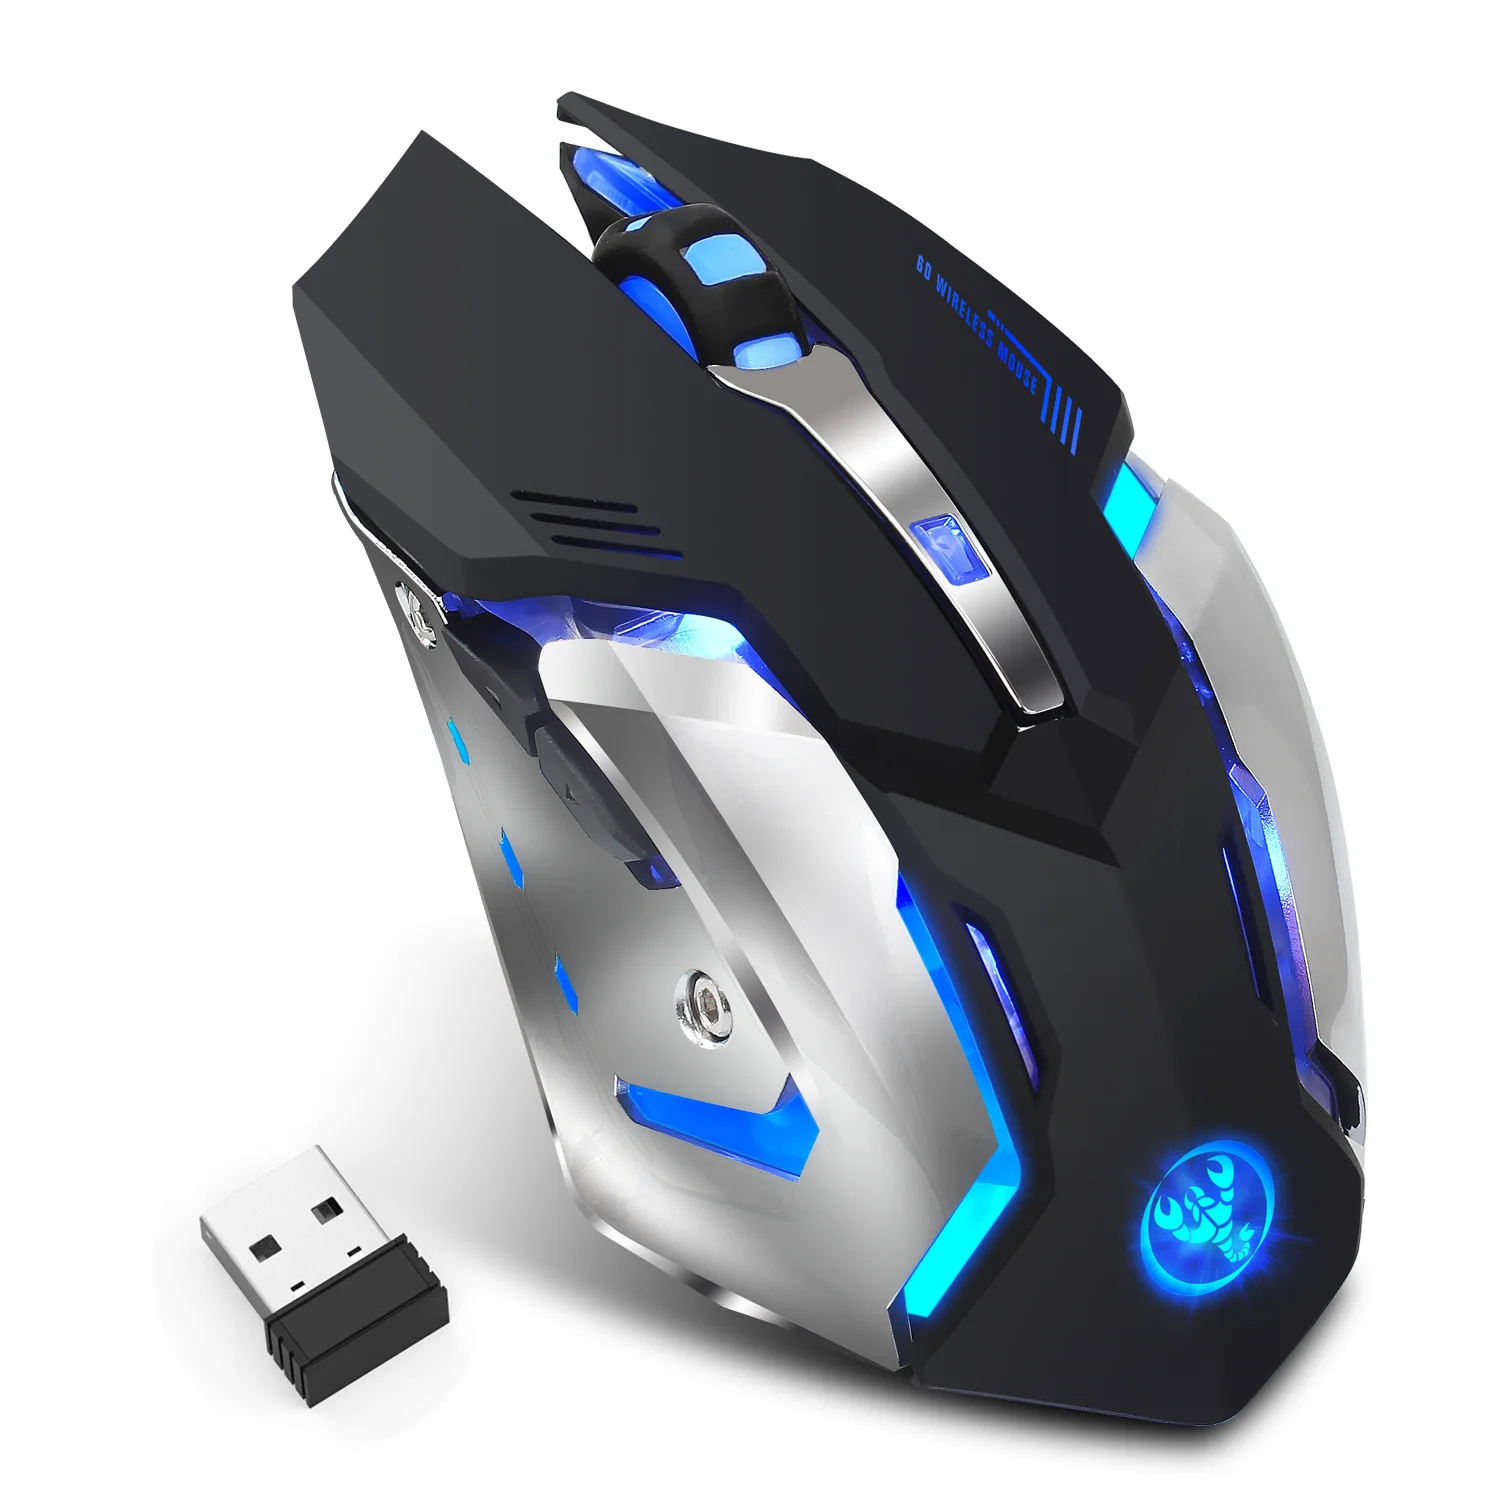 

HXSJ M10 Wireless Gaming Mouse 2400dpi Rechargeable 7 color Backlight Breathing Comfort Gamer Mice for Computer Desktop Laptop